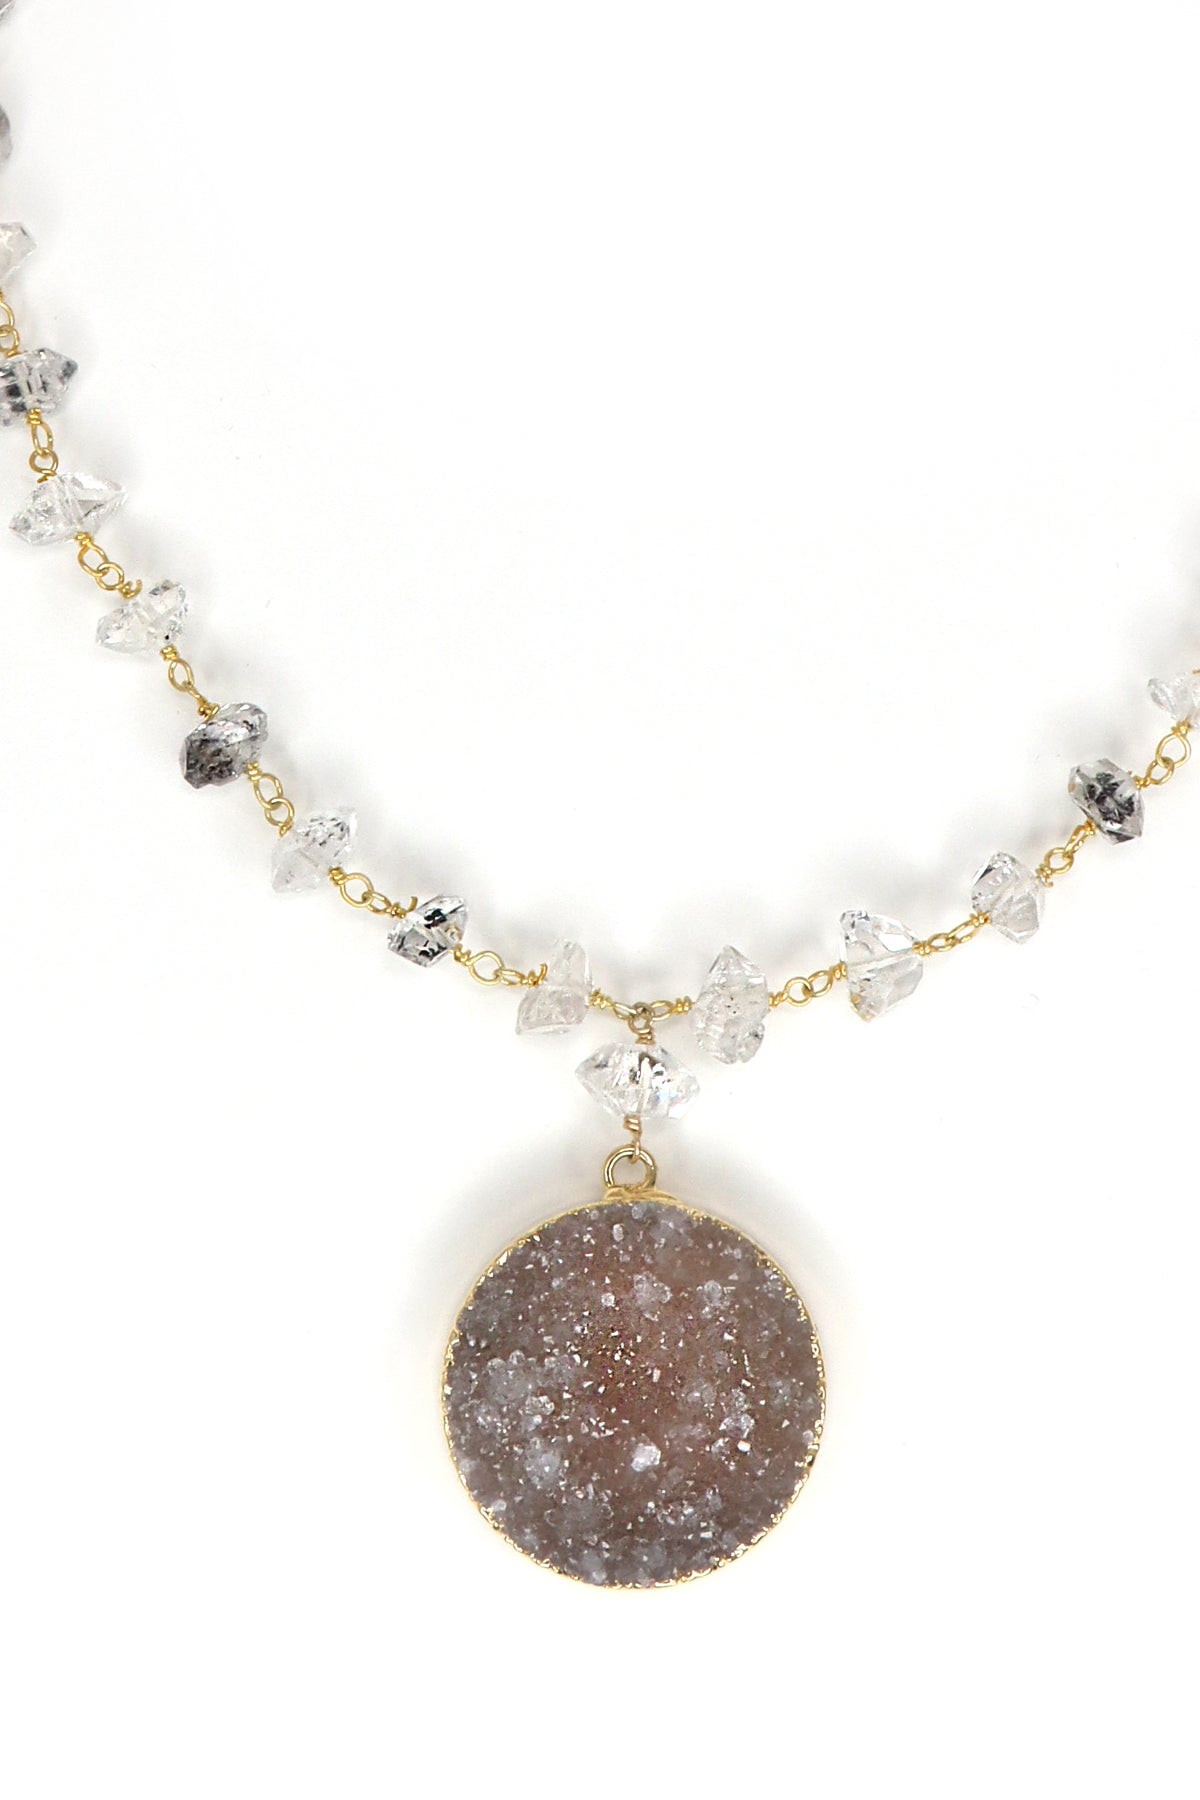 Ad Astra Necklace